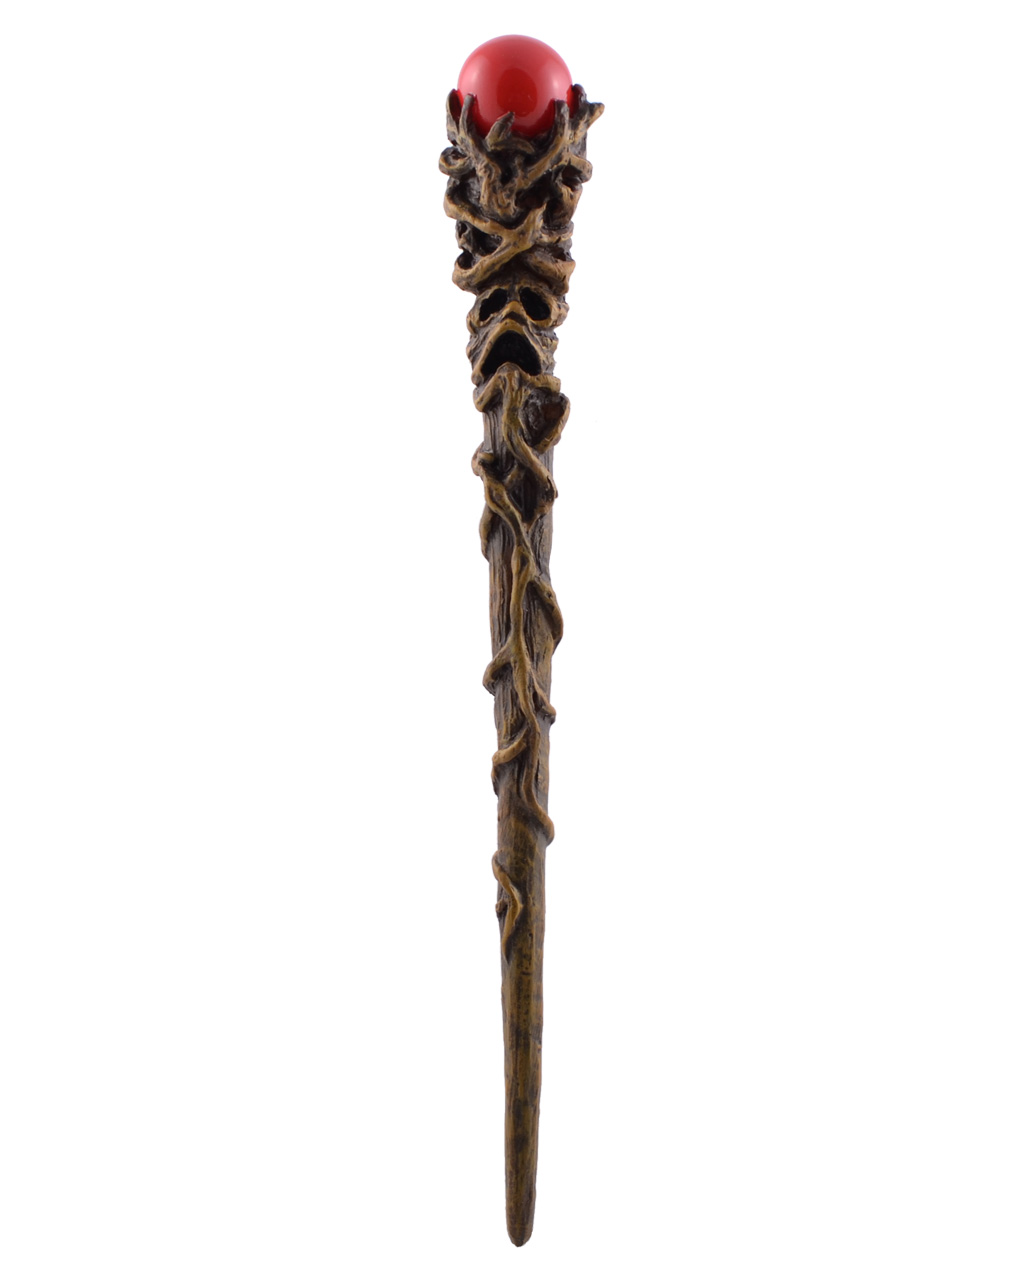 Magic Wand Arborea With Red Ball order